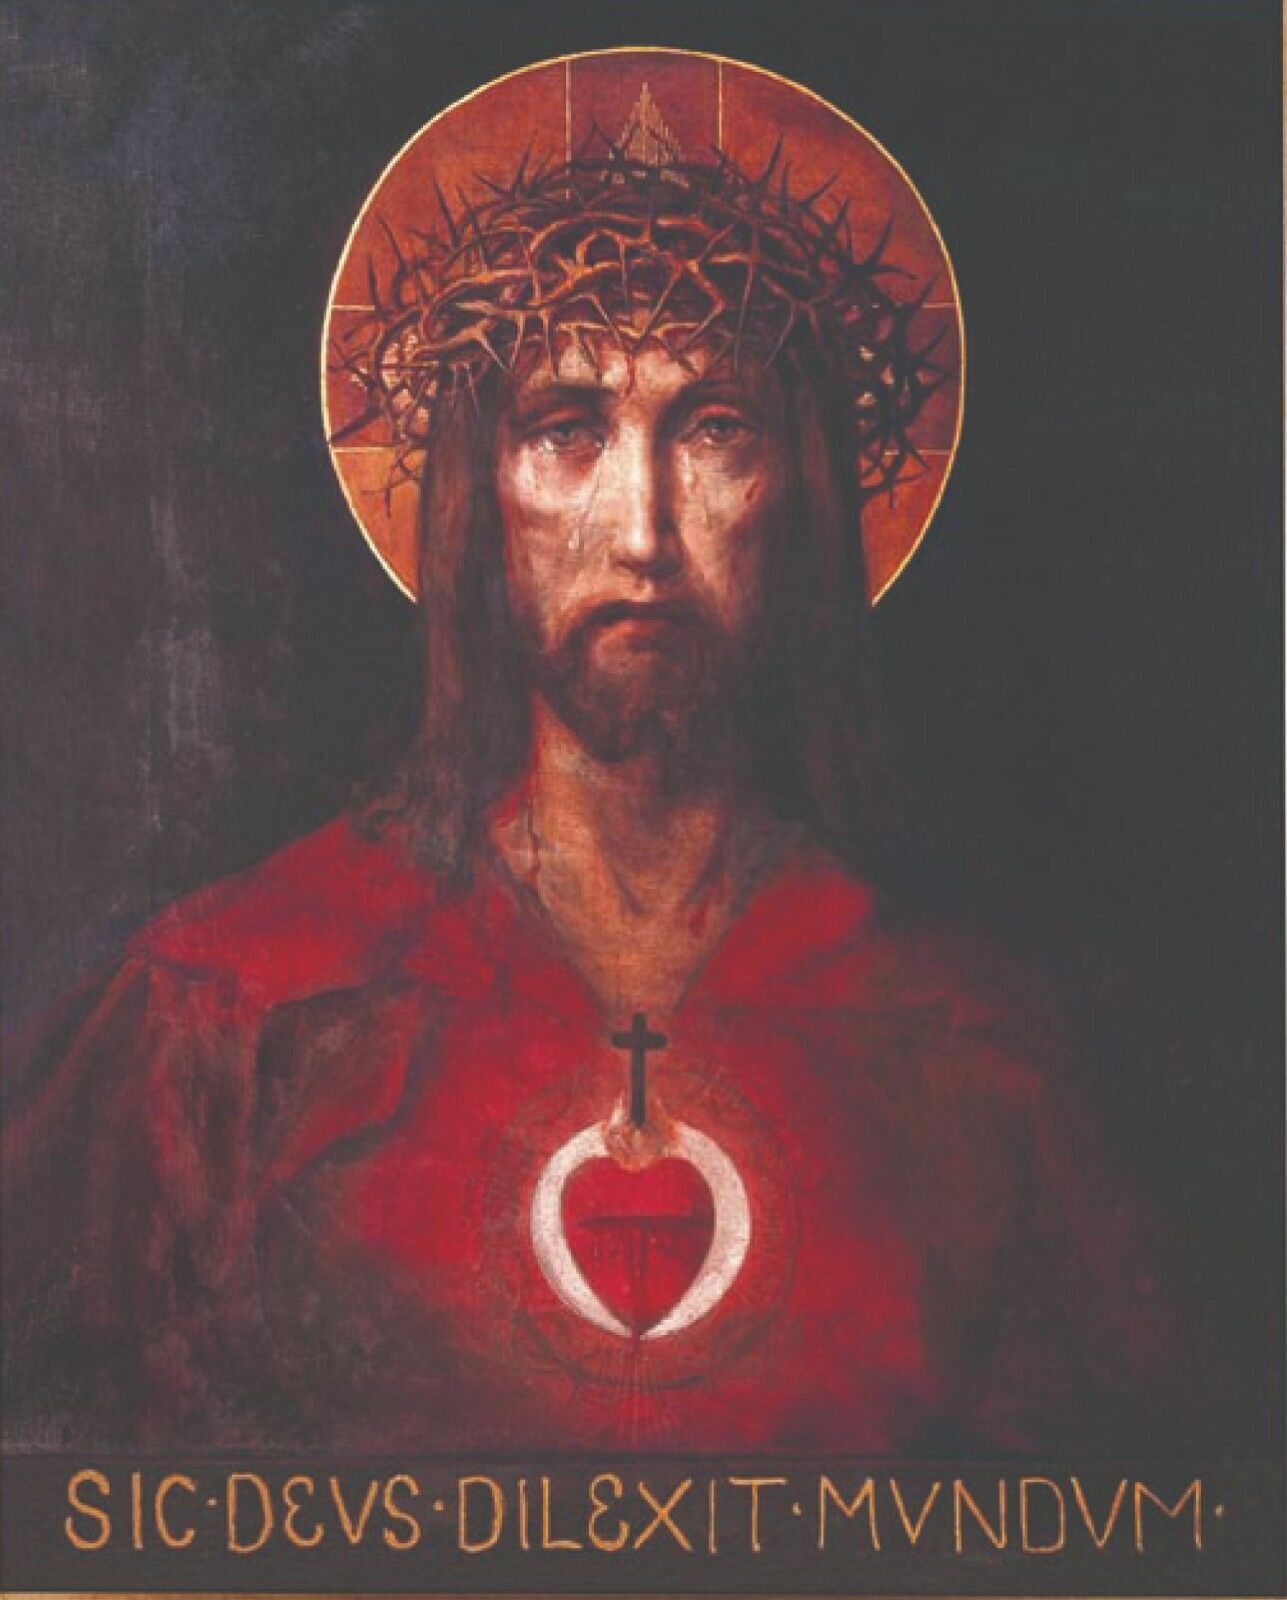 JESUS CHRIST SACRED HEART 8.5X11 Photo Poster painting PICTURE CROWN OF THORNS GOD FATHER SON